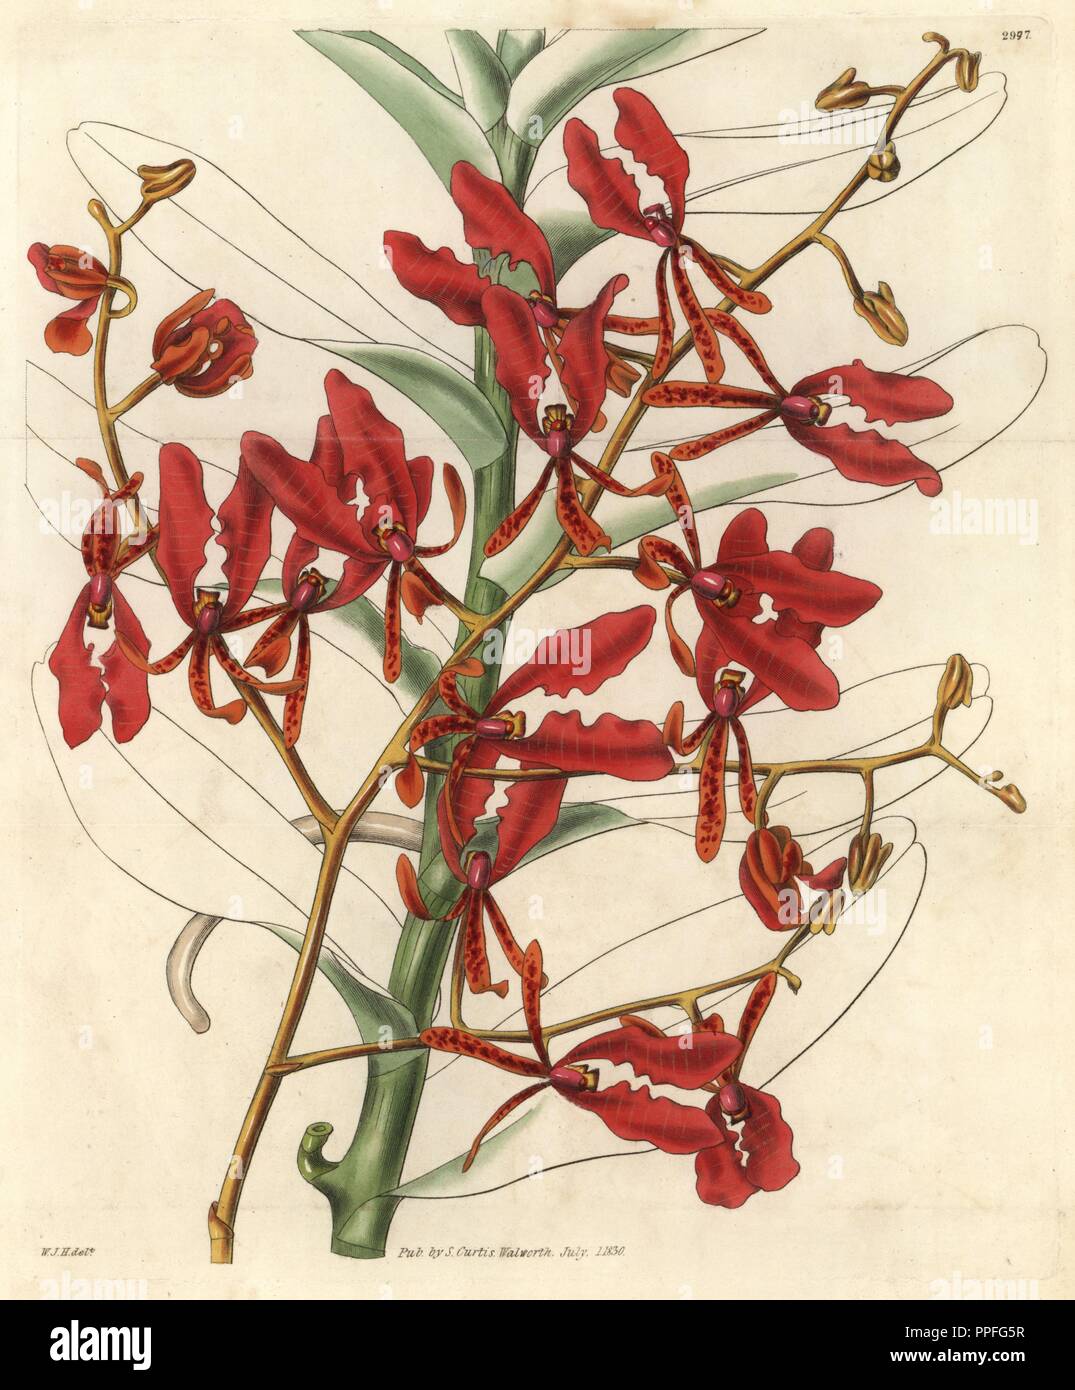 Scarlet renanthera orchid, Renanthera coccinea. Illustration drawn by William Jackson Hooker, engraved by Swan. Handcolored copperplate engraving from William Curtis's 'The Botanical Magazine,' Samuel Curtis, 1830. Hooker (1785-1865) was an English botanist, writer and artist. He was Regius Professor of Botany at Glasgow University, and editor of Curtis' 'Botanical Magazine' from 1827 to 1865. In 1841, he was appointed director of the Royal Botanic Gardens at Kew, and was succeeded by his son Joseph Dalton. Hooker documented the fern and orchid crazes that shook England in the mid-19th century Stock Photo